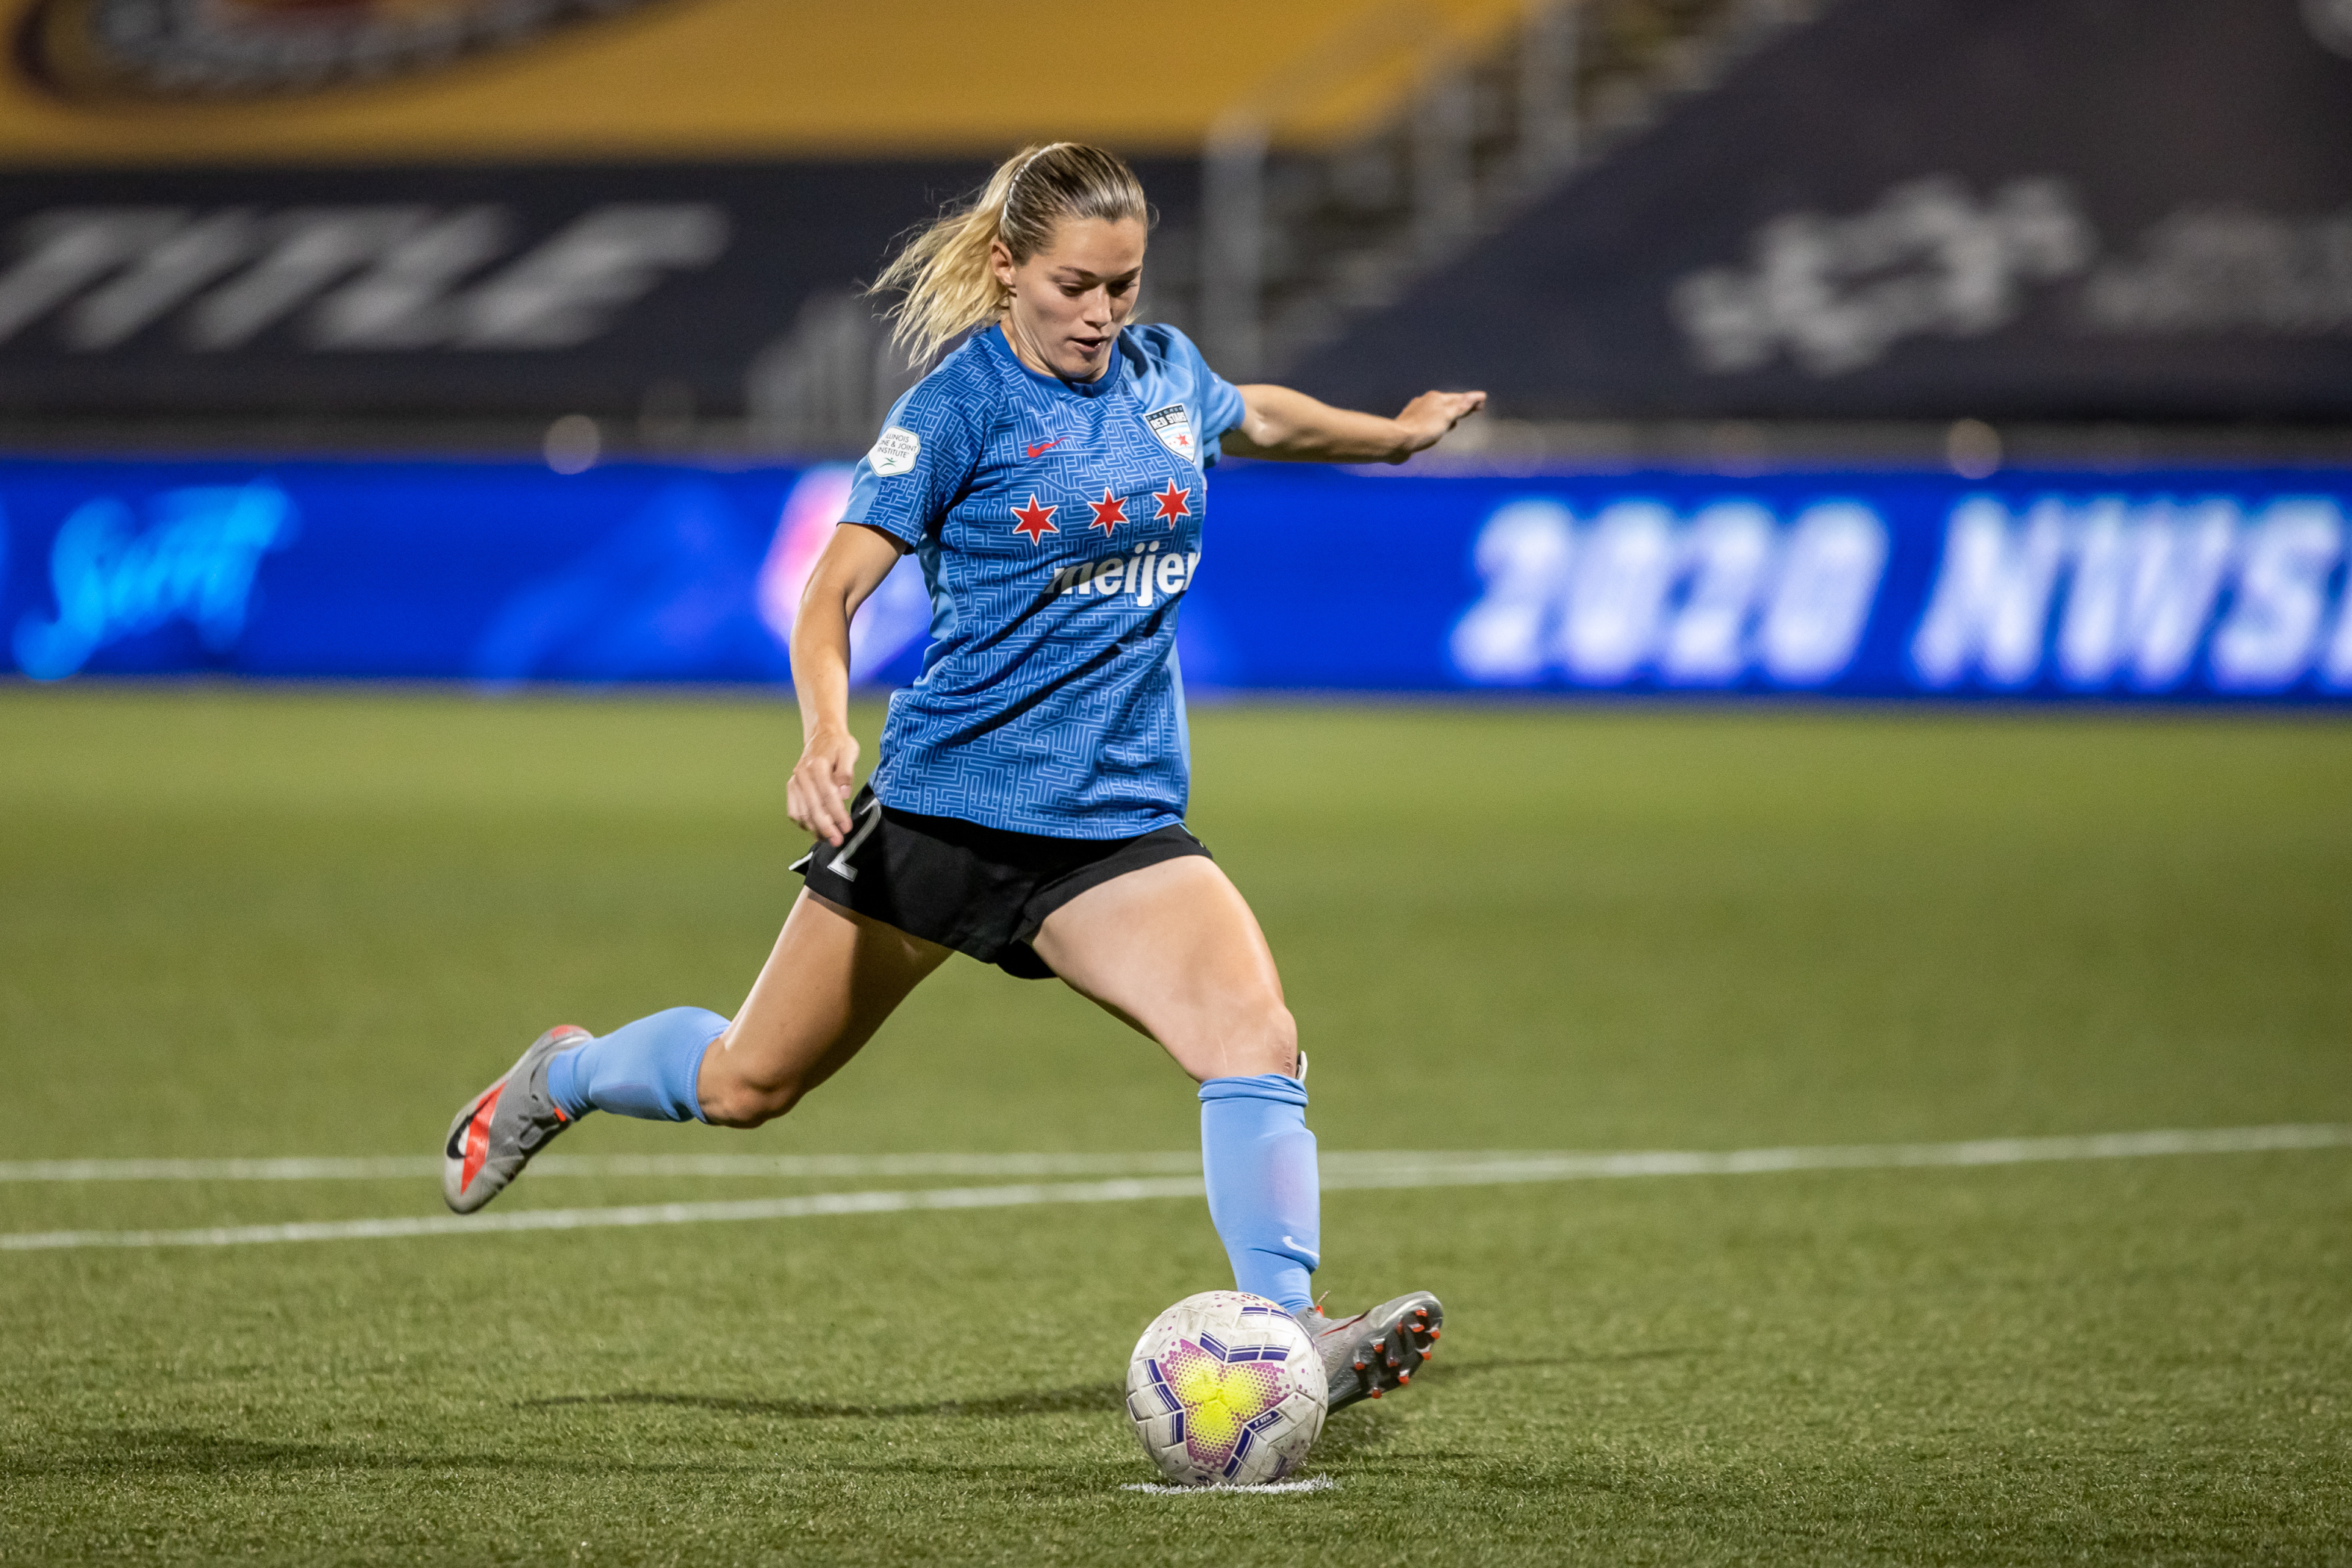 Racing Louisville FC vs. Chicago Red Stars: Extended Highlights, NWSL